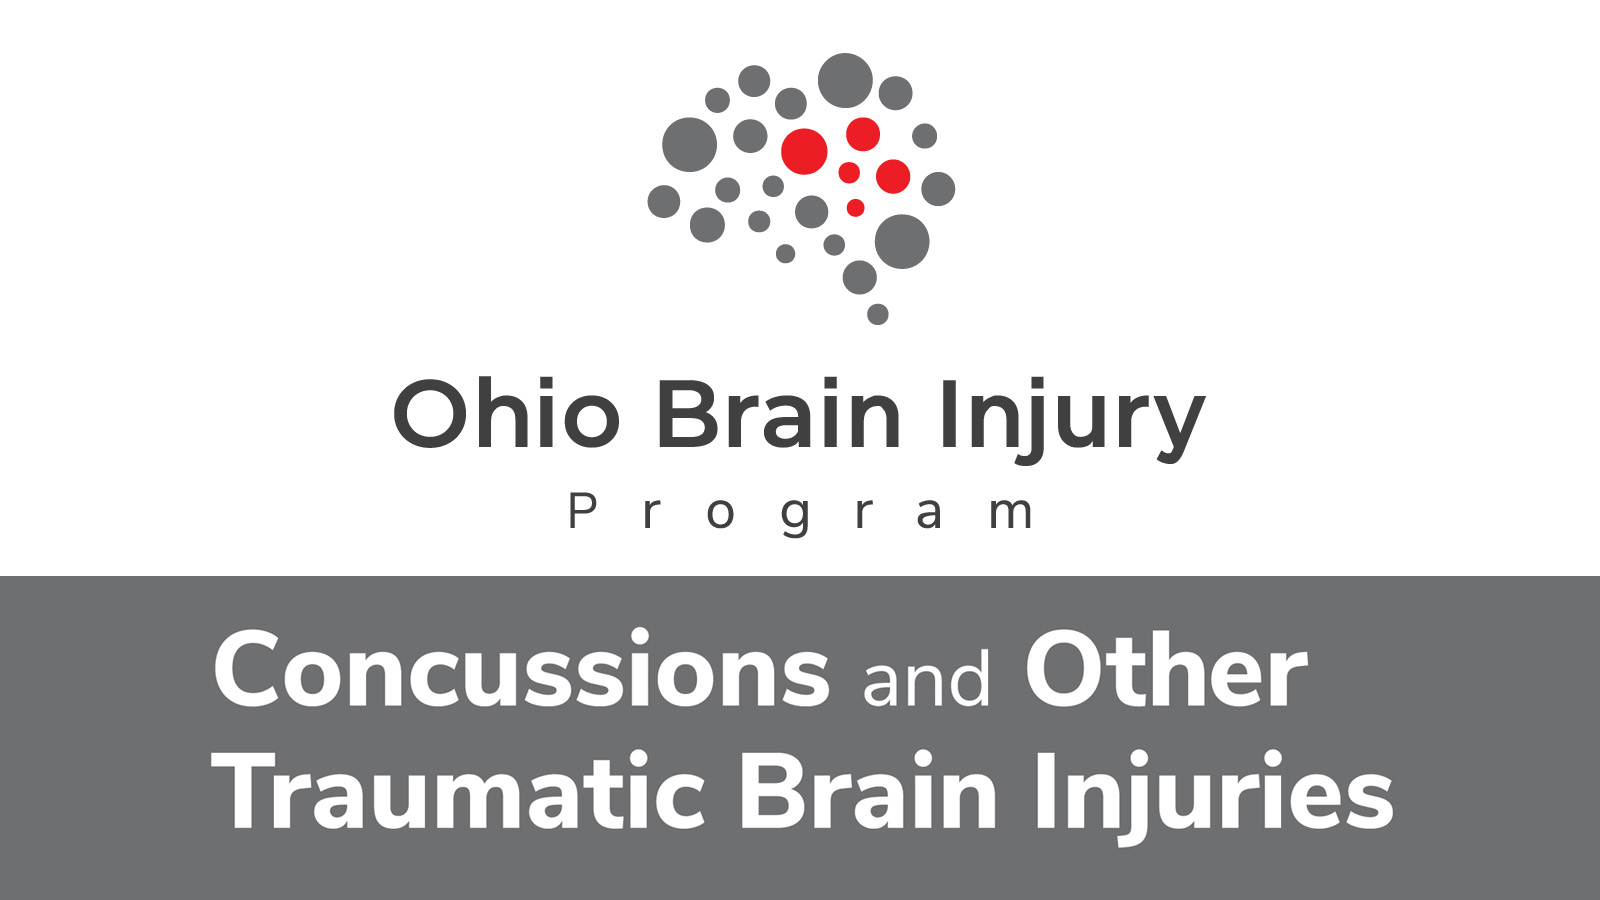 Ohio Brain Injury Porgram: Concussions and Other Traumatic Brain Injuries Survey